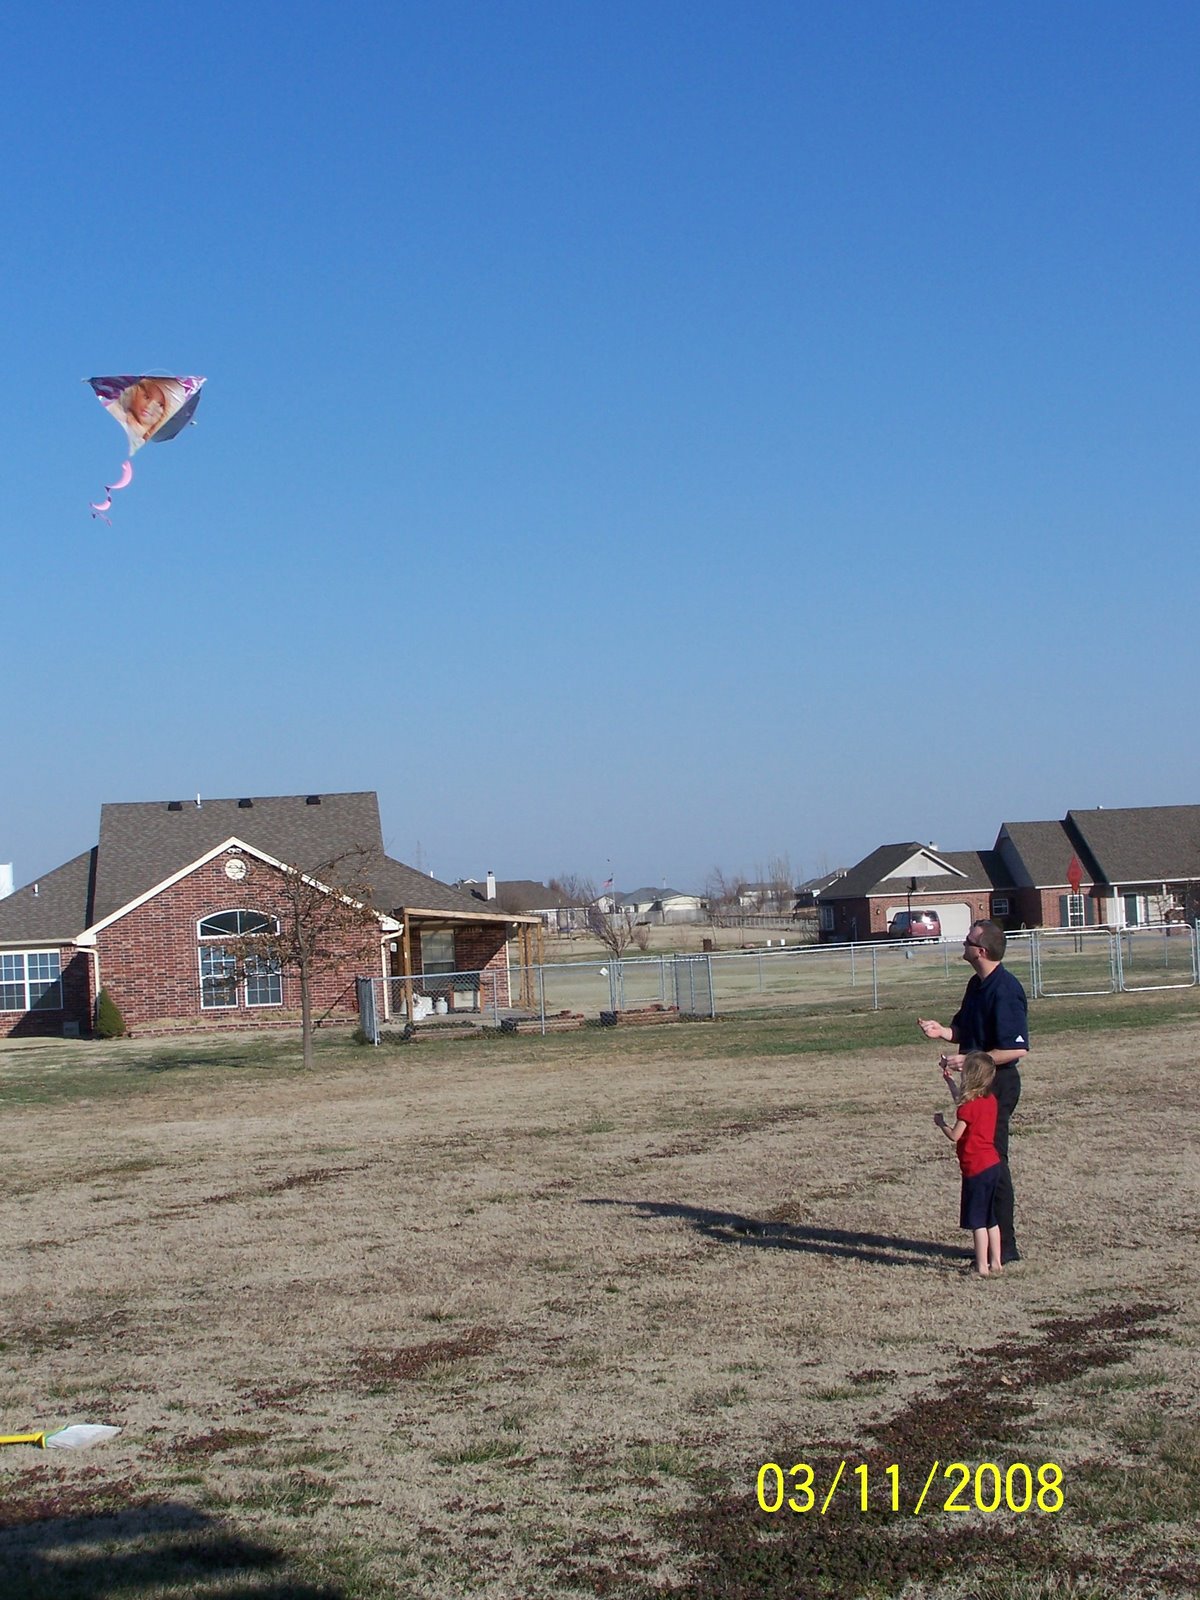 [a+and+daddy+flying+kite+03_08.jpg]